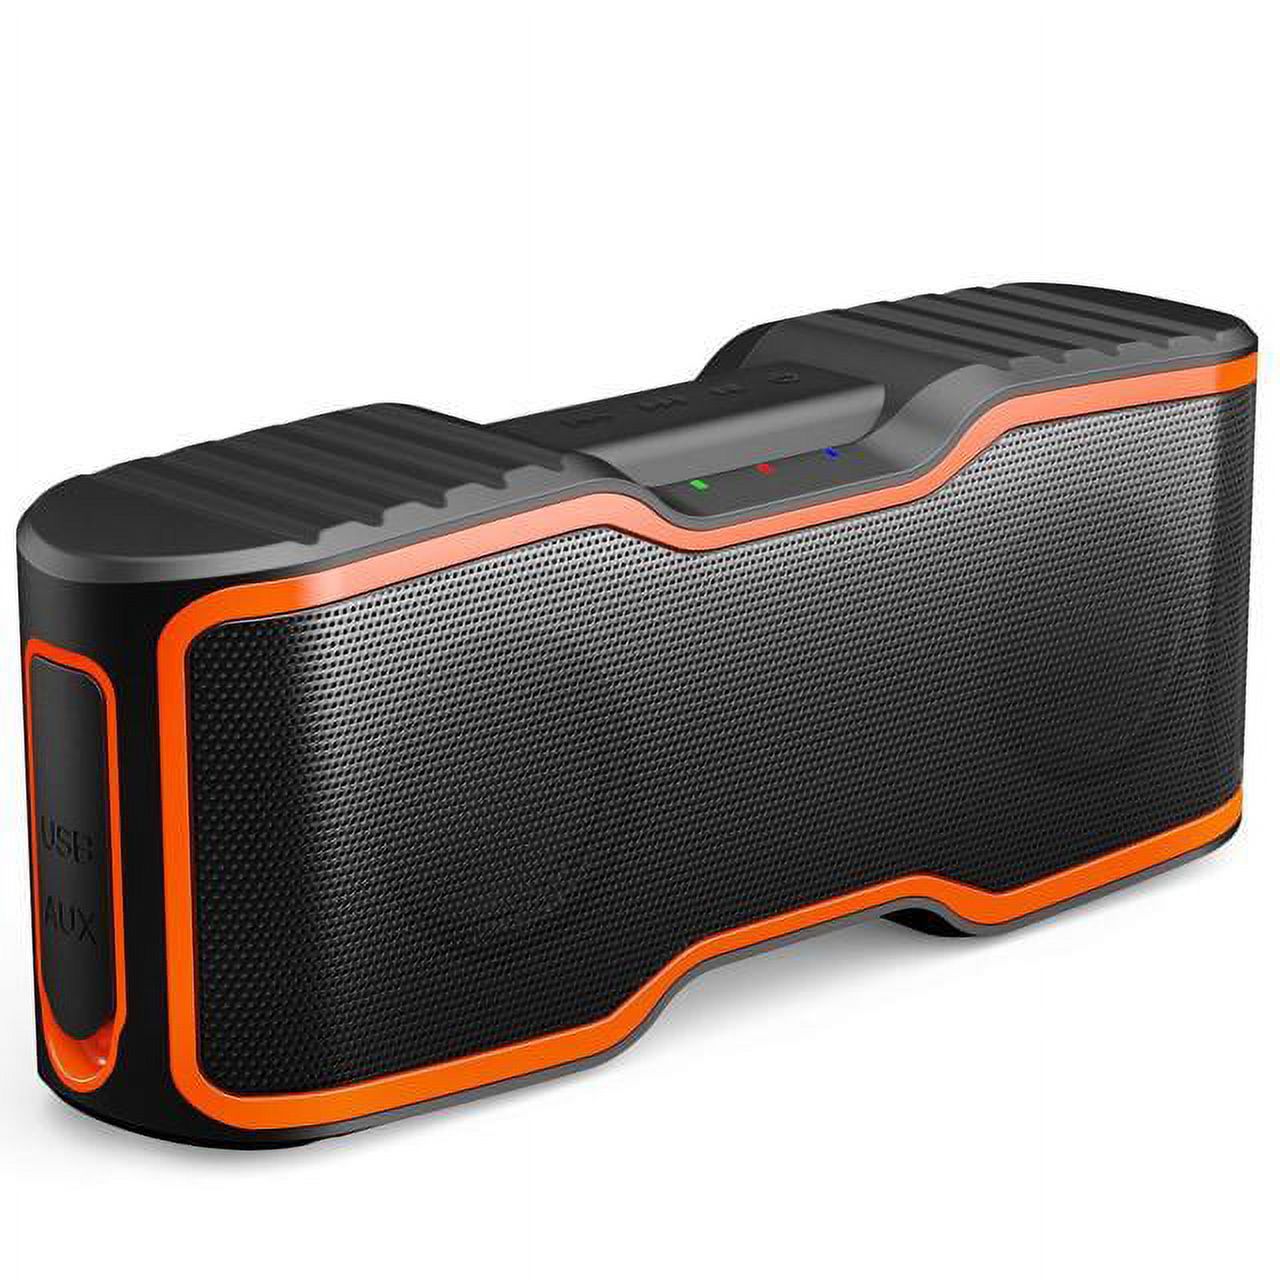 AOMAIS Sport II Portable Wireless Bluetooth Speakers 4.0 Waterproof IPX7, 20W Bass Sound, Stereo Pairing, Durable Design Backyard, Outdoors, Travel, Pool, Home Party (Orange) - image 1 of 7